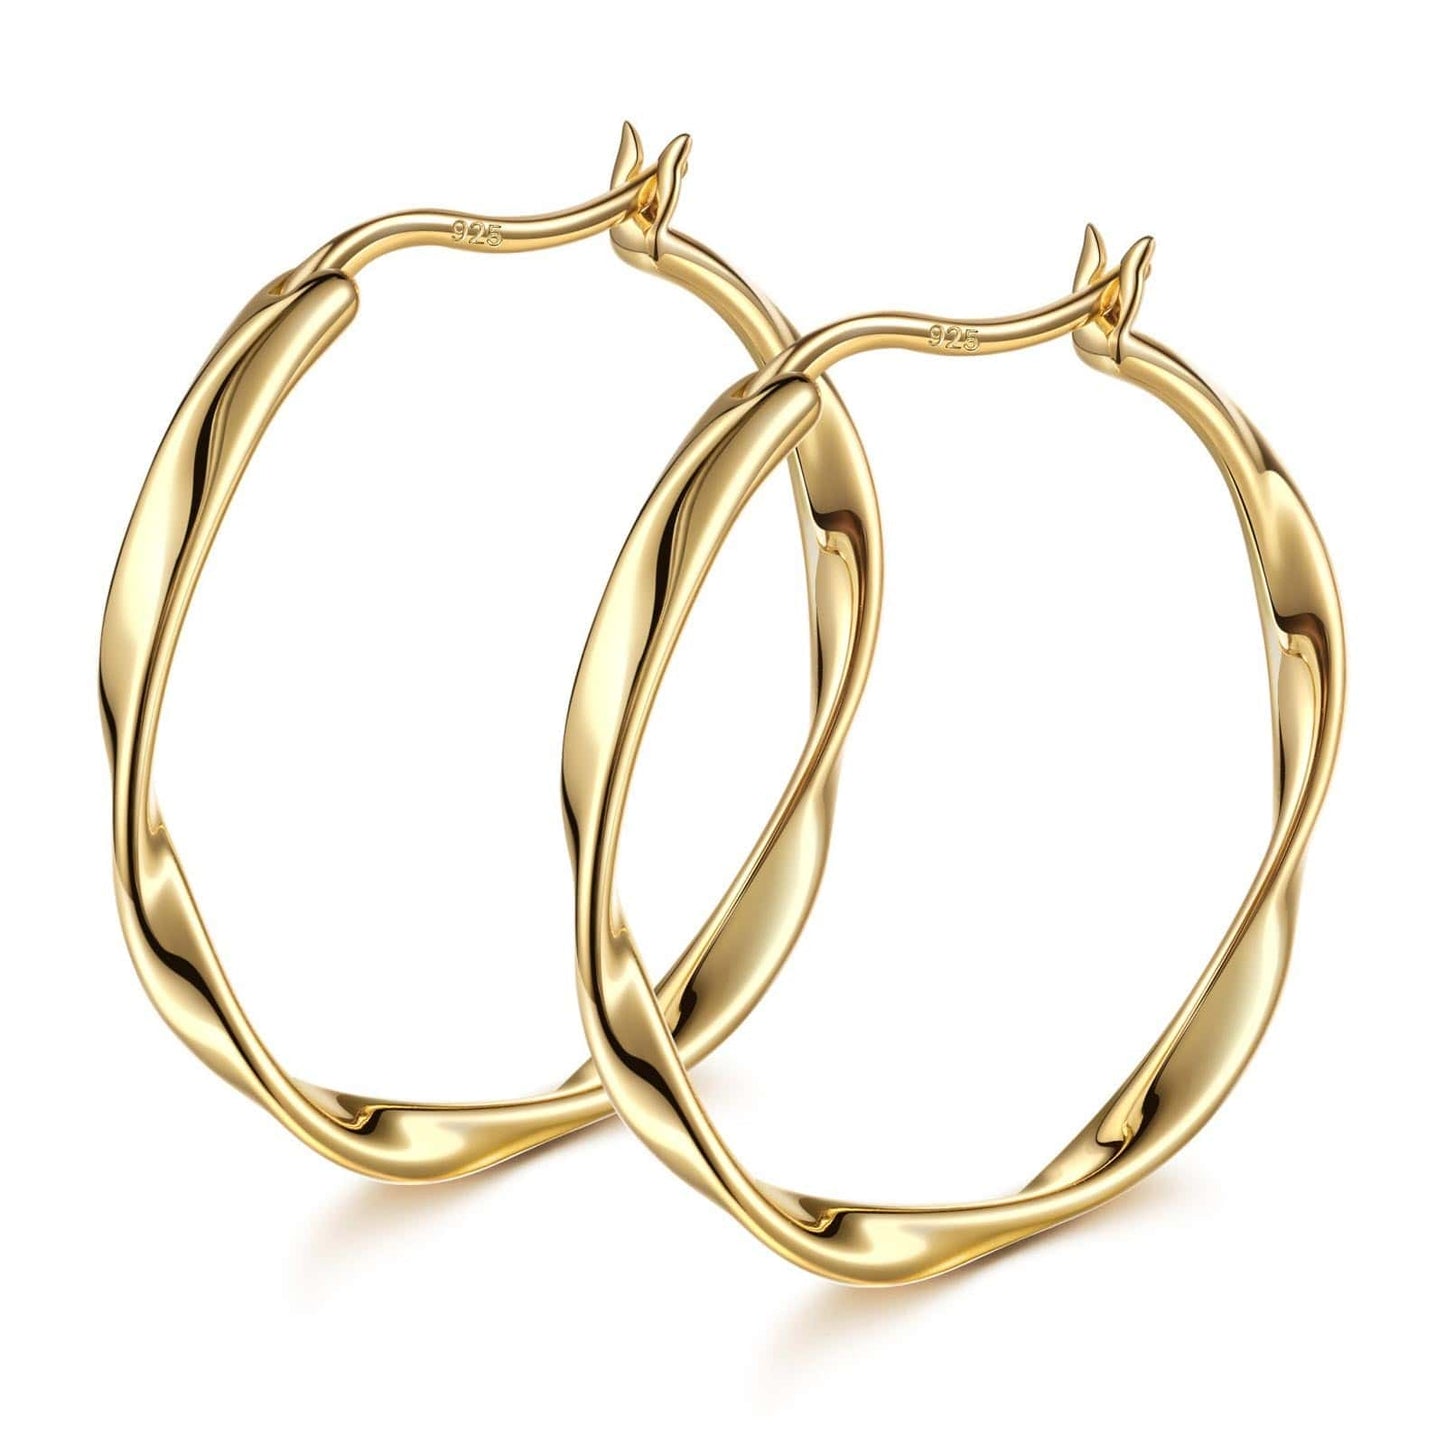 Tarnish-resistant Silver L Size Classic Hoop Earrings with Sterling Silver Ear Post In 14K Gold Plated